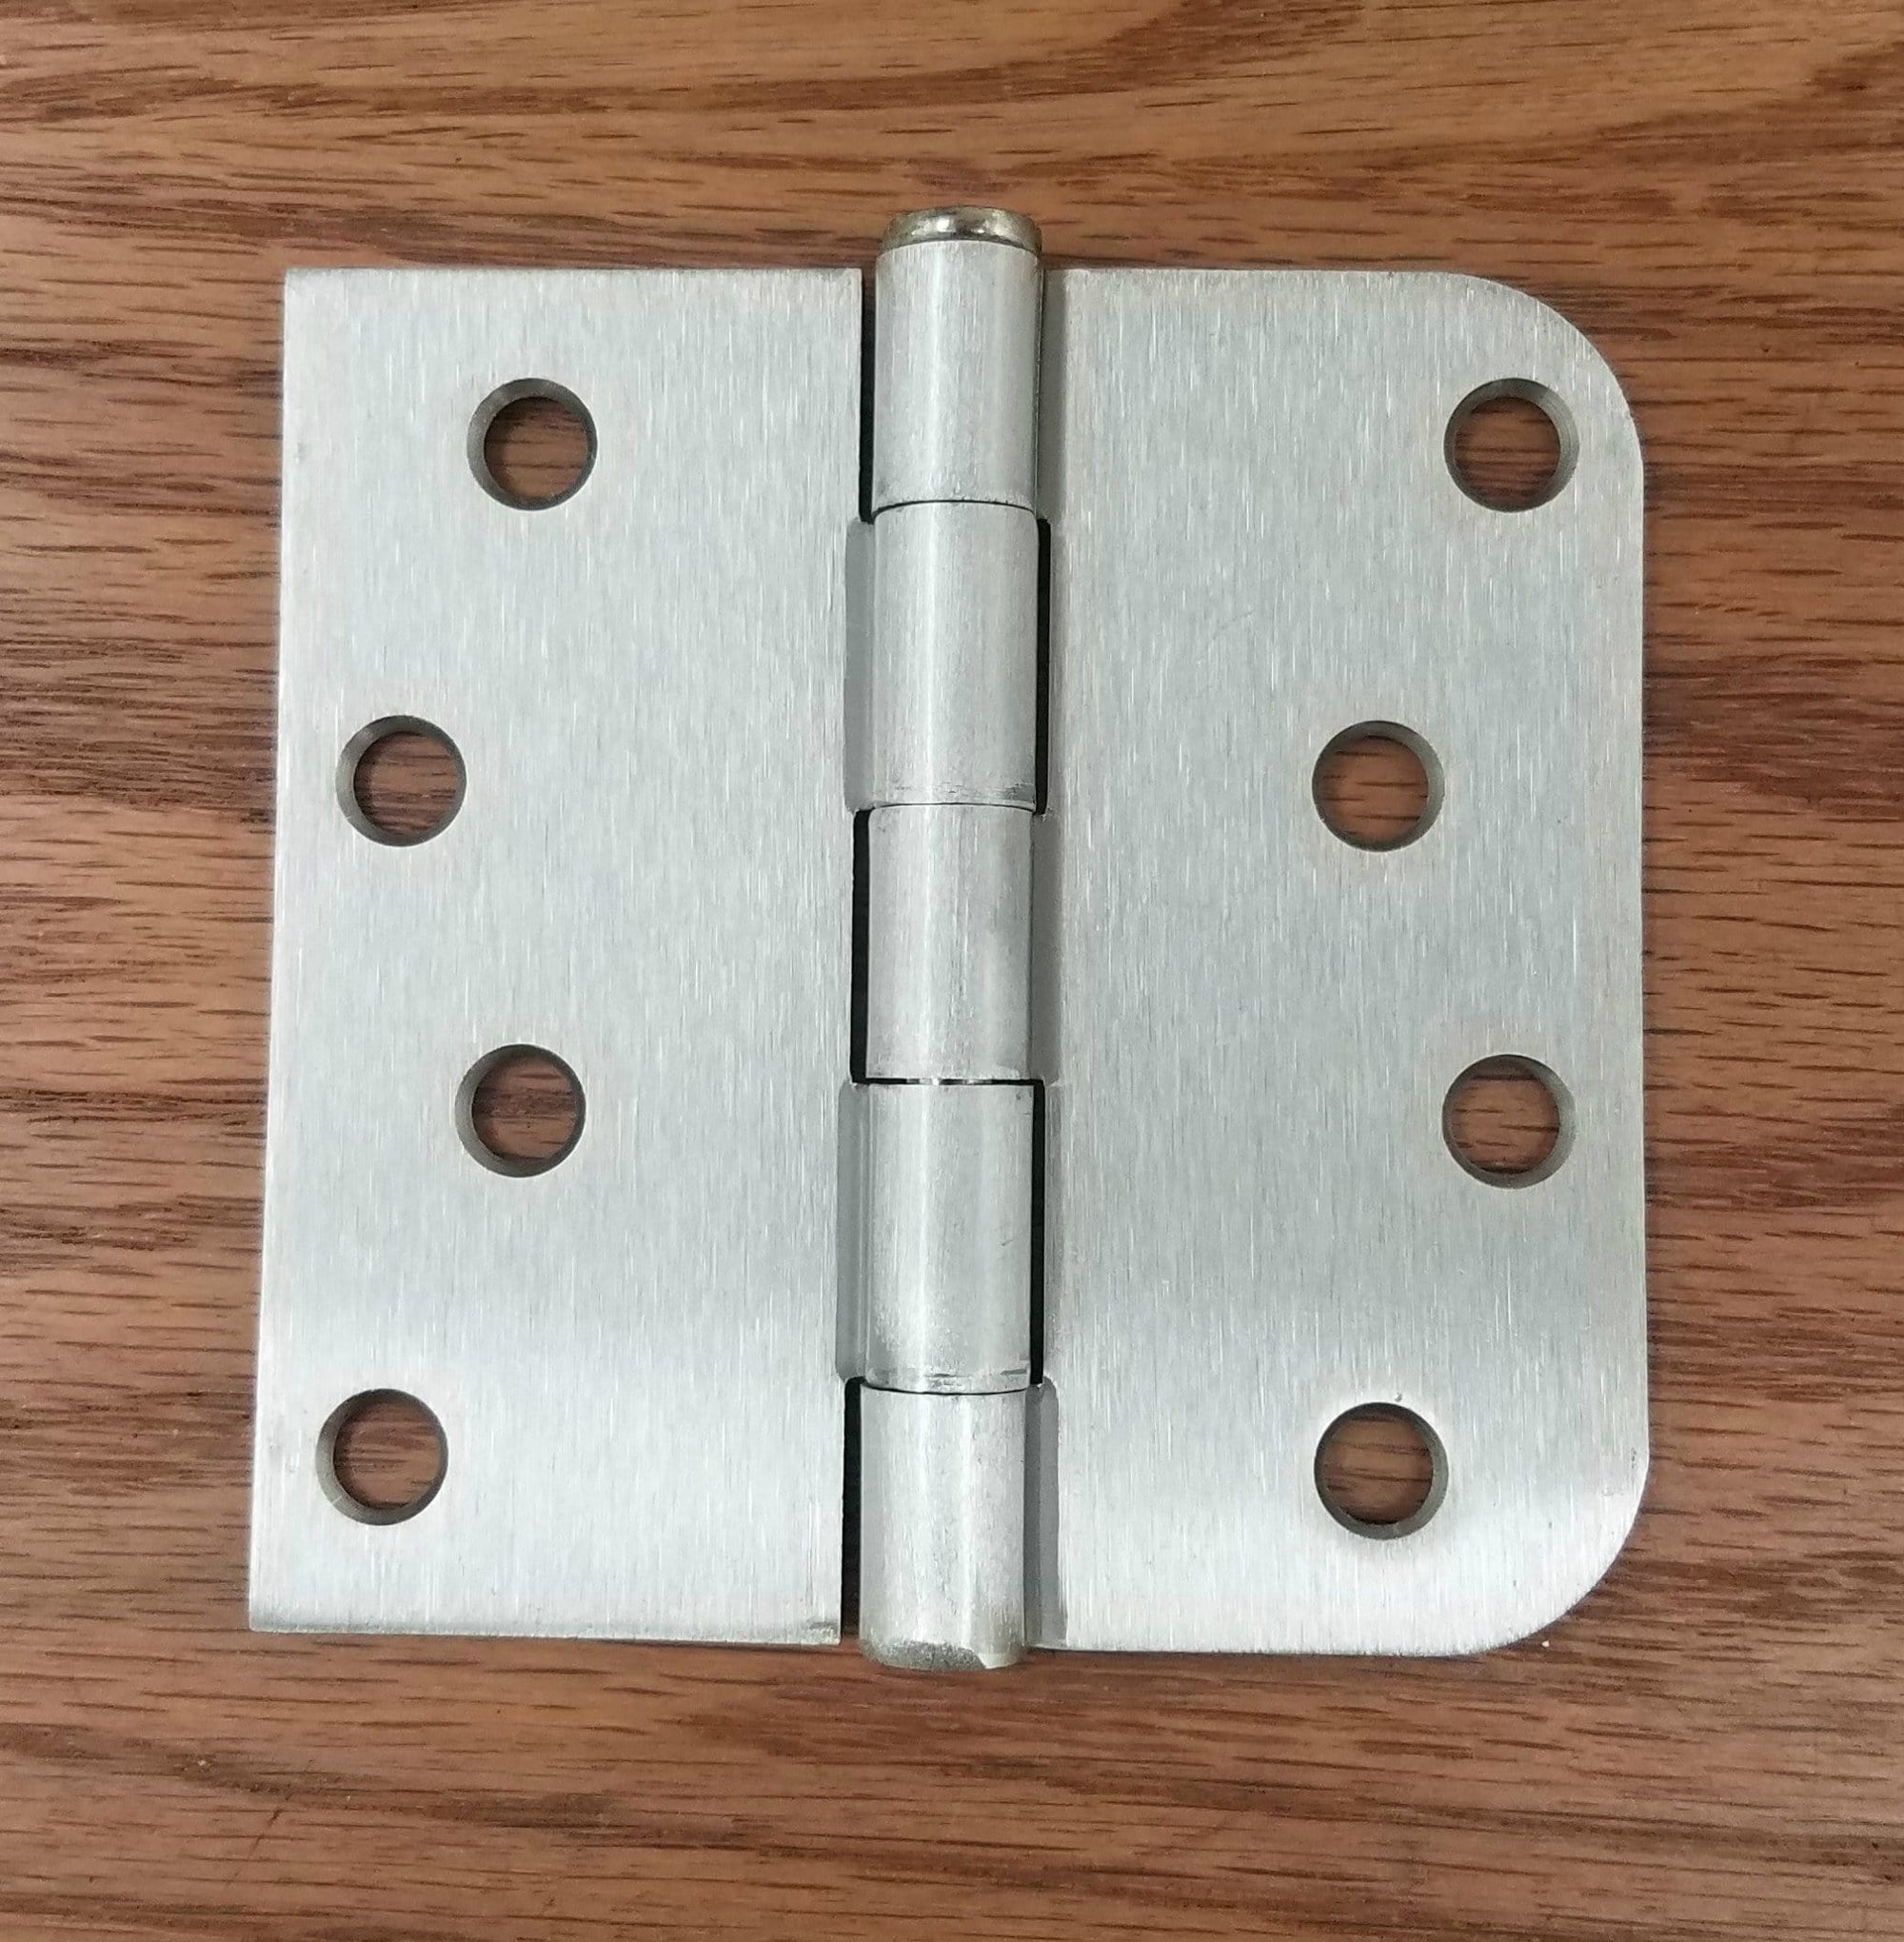 Residential Satin Nickel Door Hinges - 4 Inch With 5/8 Inch Square - Plain Bearing - 2 Pack